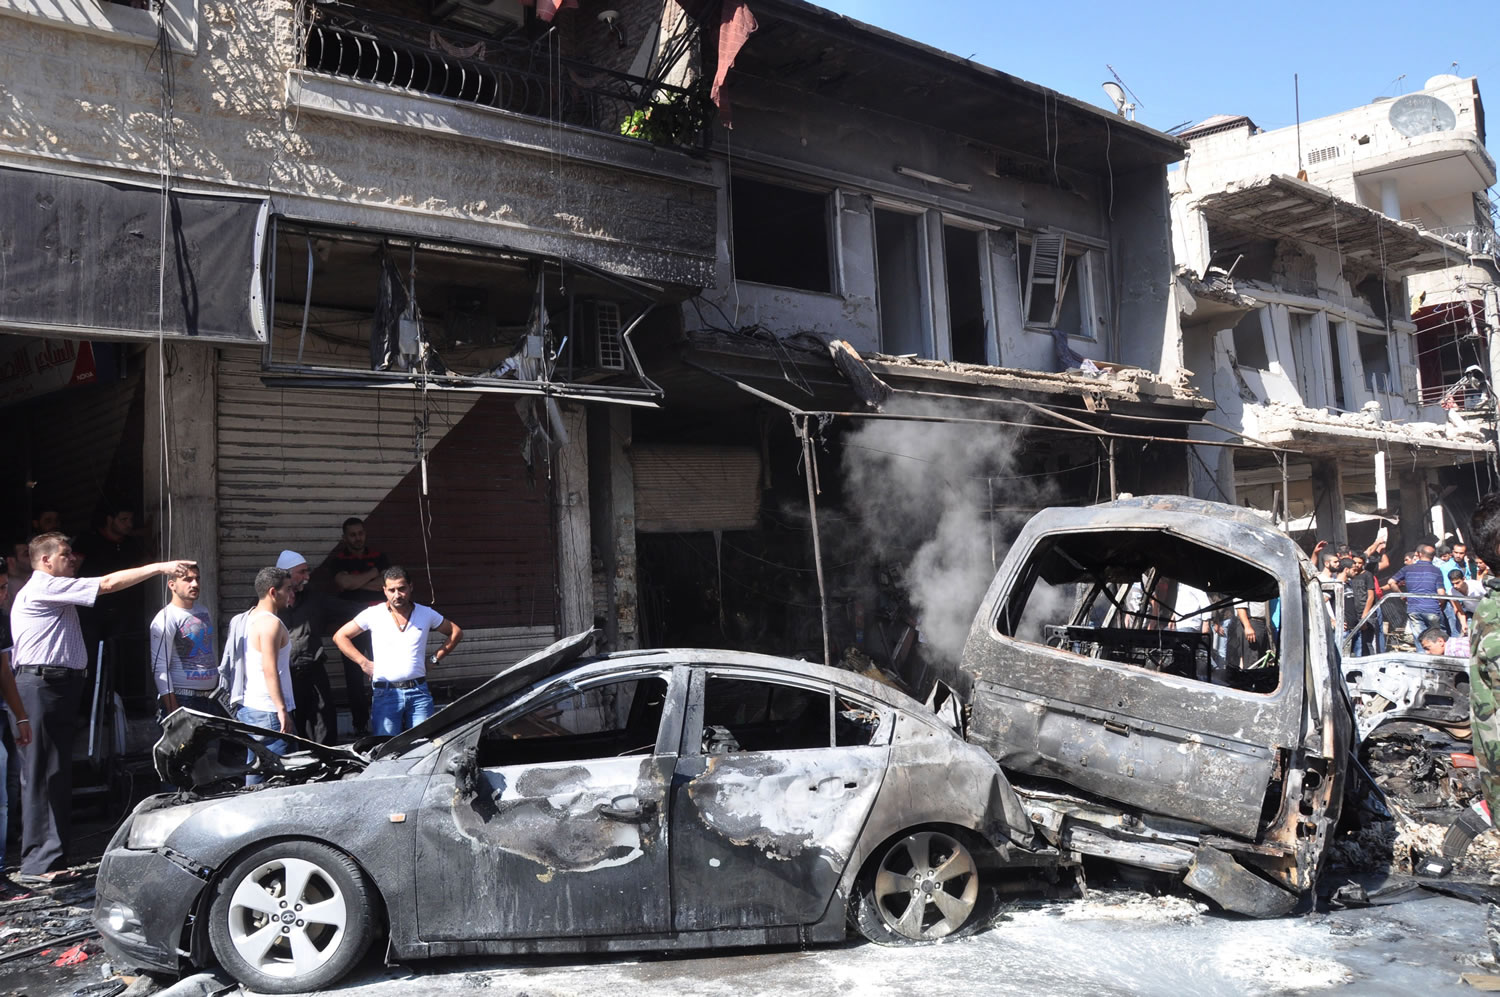 Syrian citizens gather near damaged cars that were burned after a car bomb exploded in the suburb of Jaramana, Damascus, Syria, on Thursday.